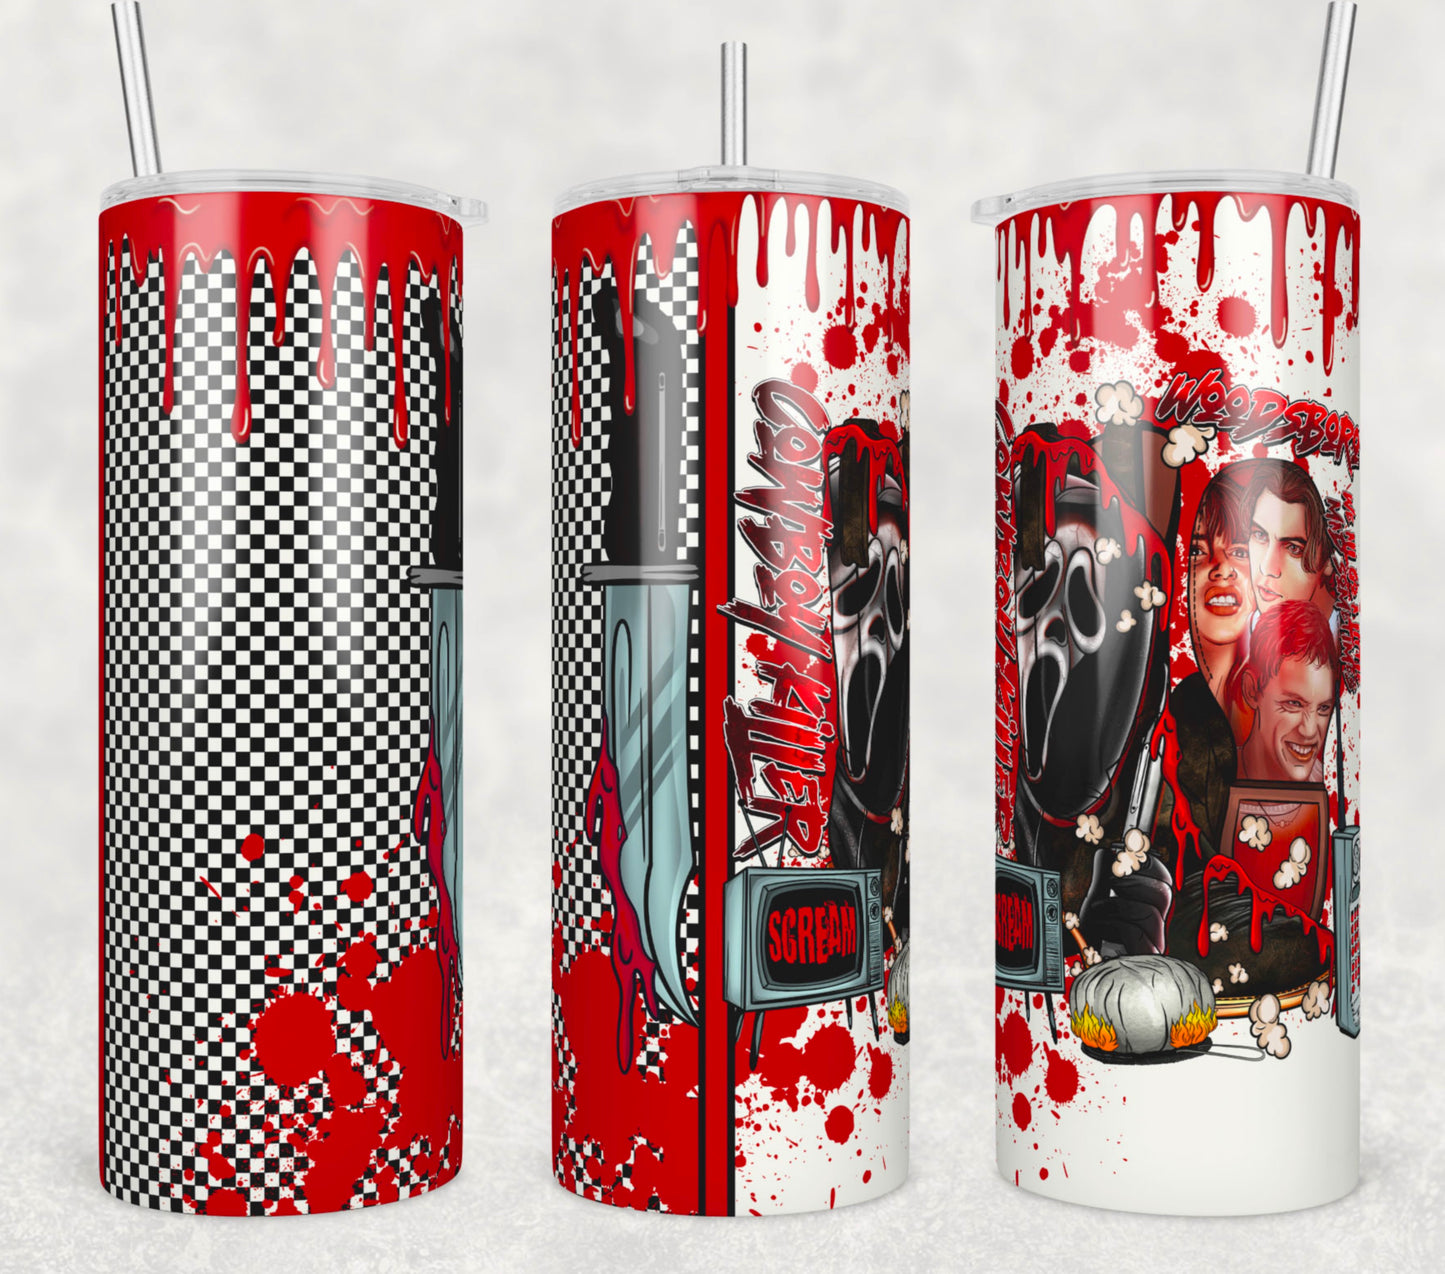 Cowboy Killer Insulated Tumbler with Plastic Lid and Sealed Reusable Straw | Trendy Horror Cup | Hot/Cold Tumbler